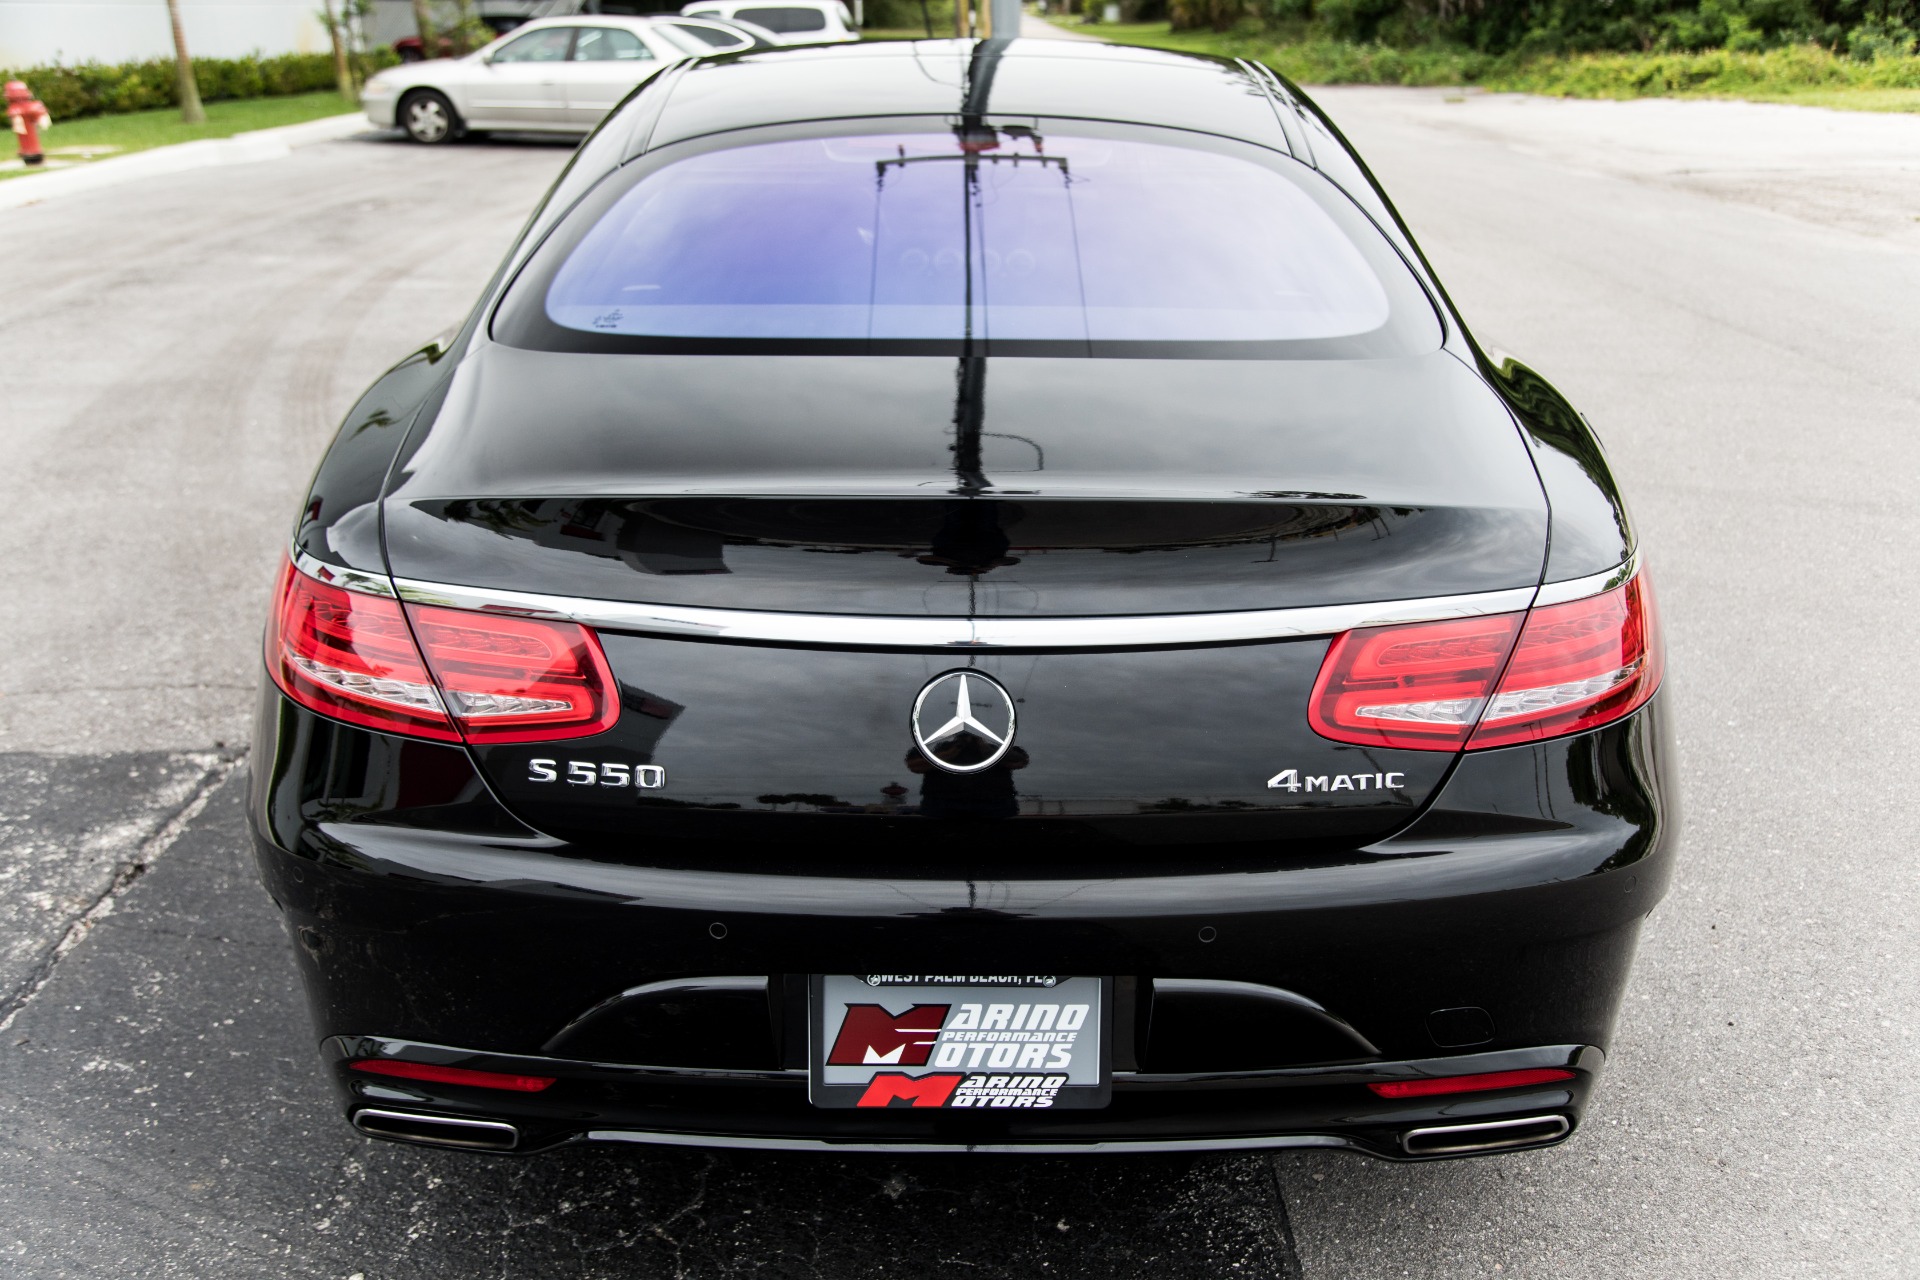 Used 2015 Mercedes-Benz S-Class S 550 4MATIC For Sale ($67,900) | Marino Performance Motors ...